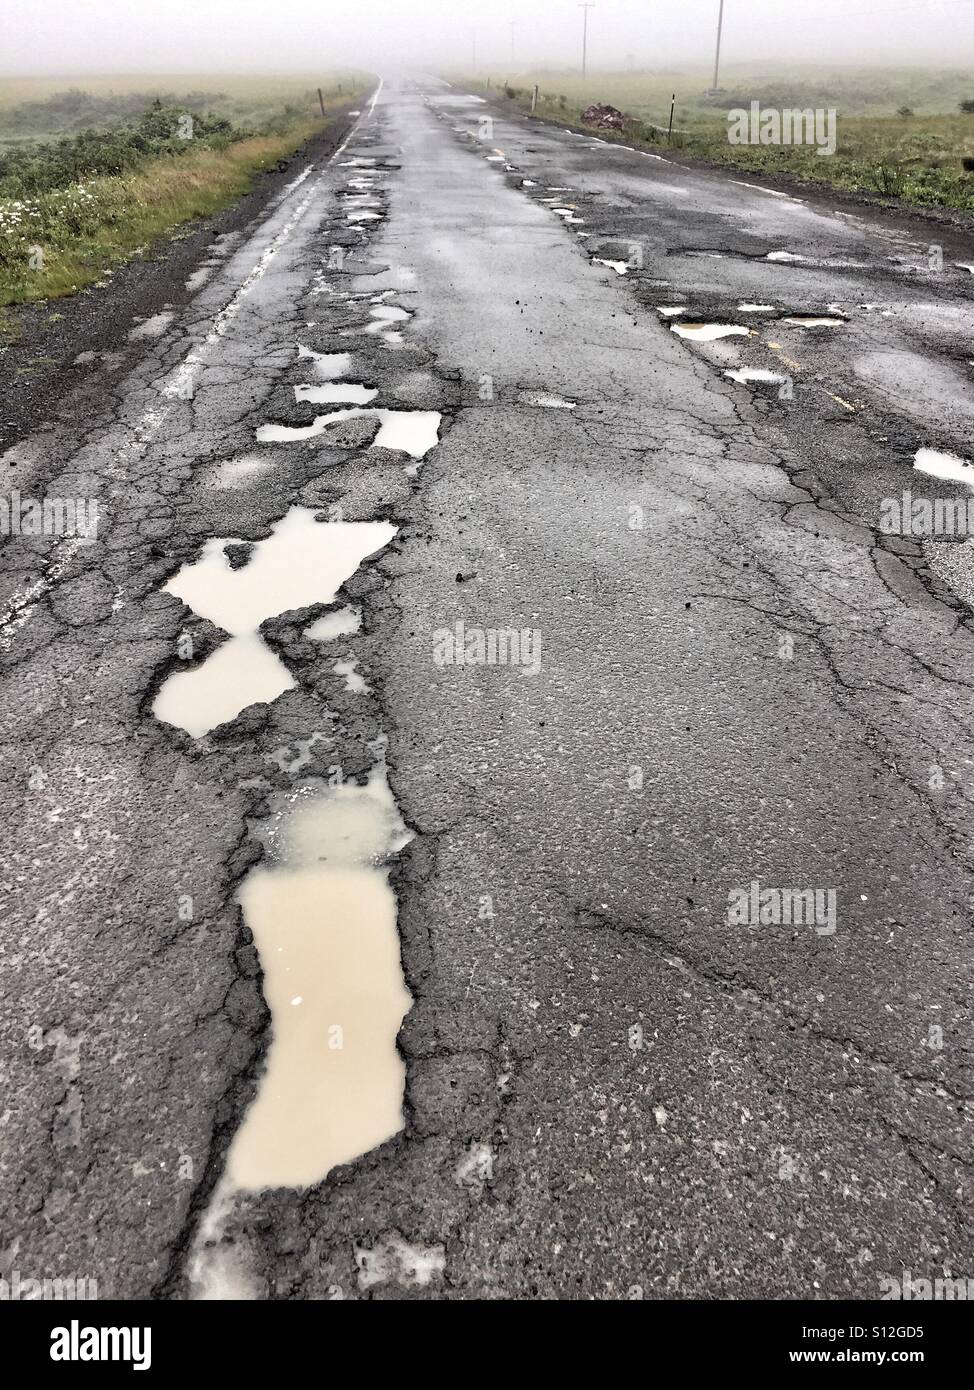 Potholes filled with muddy water on a lesser-used highway. Stock Photo